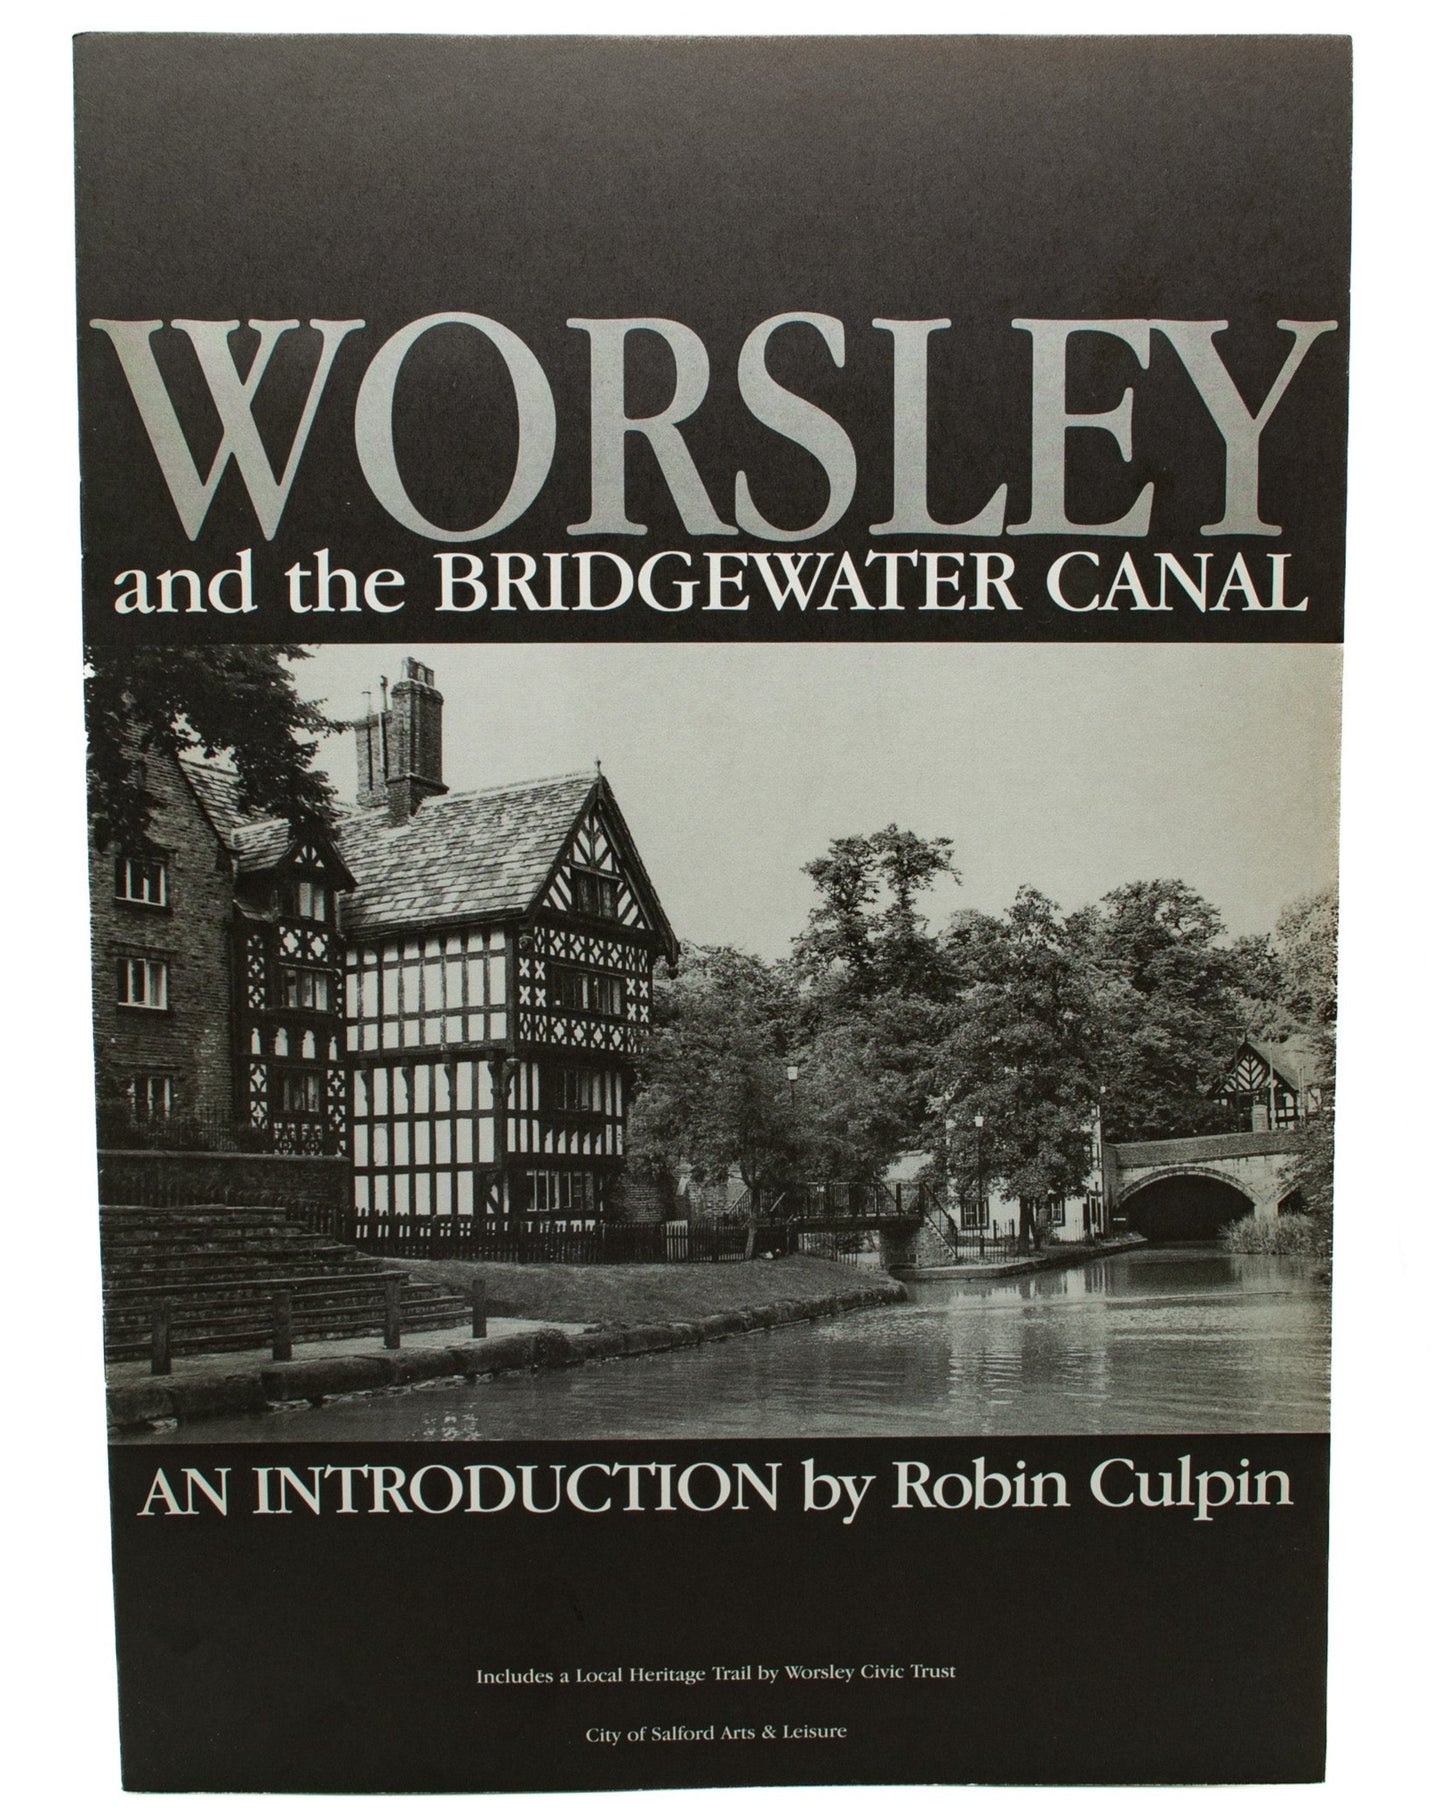 Worsley and the Bridgewater Canal Booklet